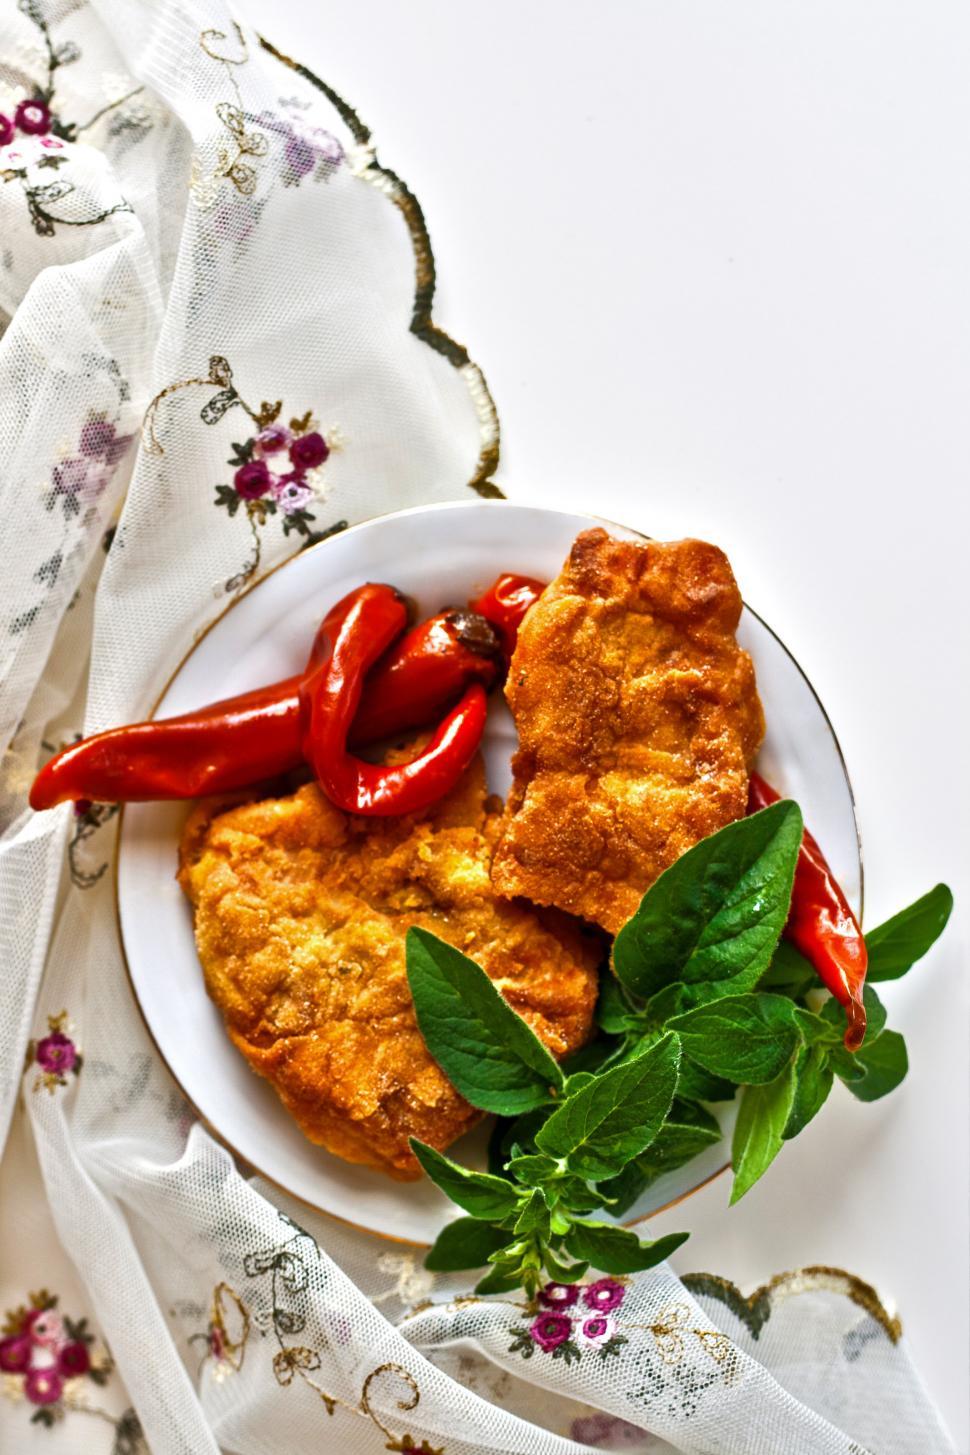 Free Image of White Plate With Fried Food and Cloth 